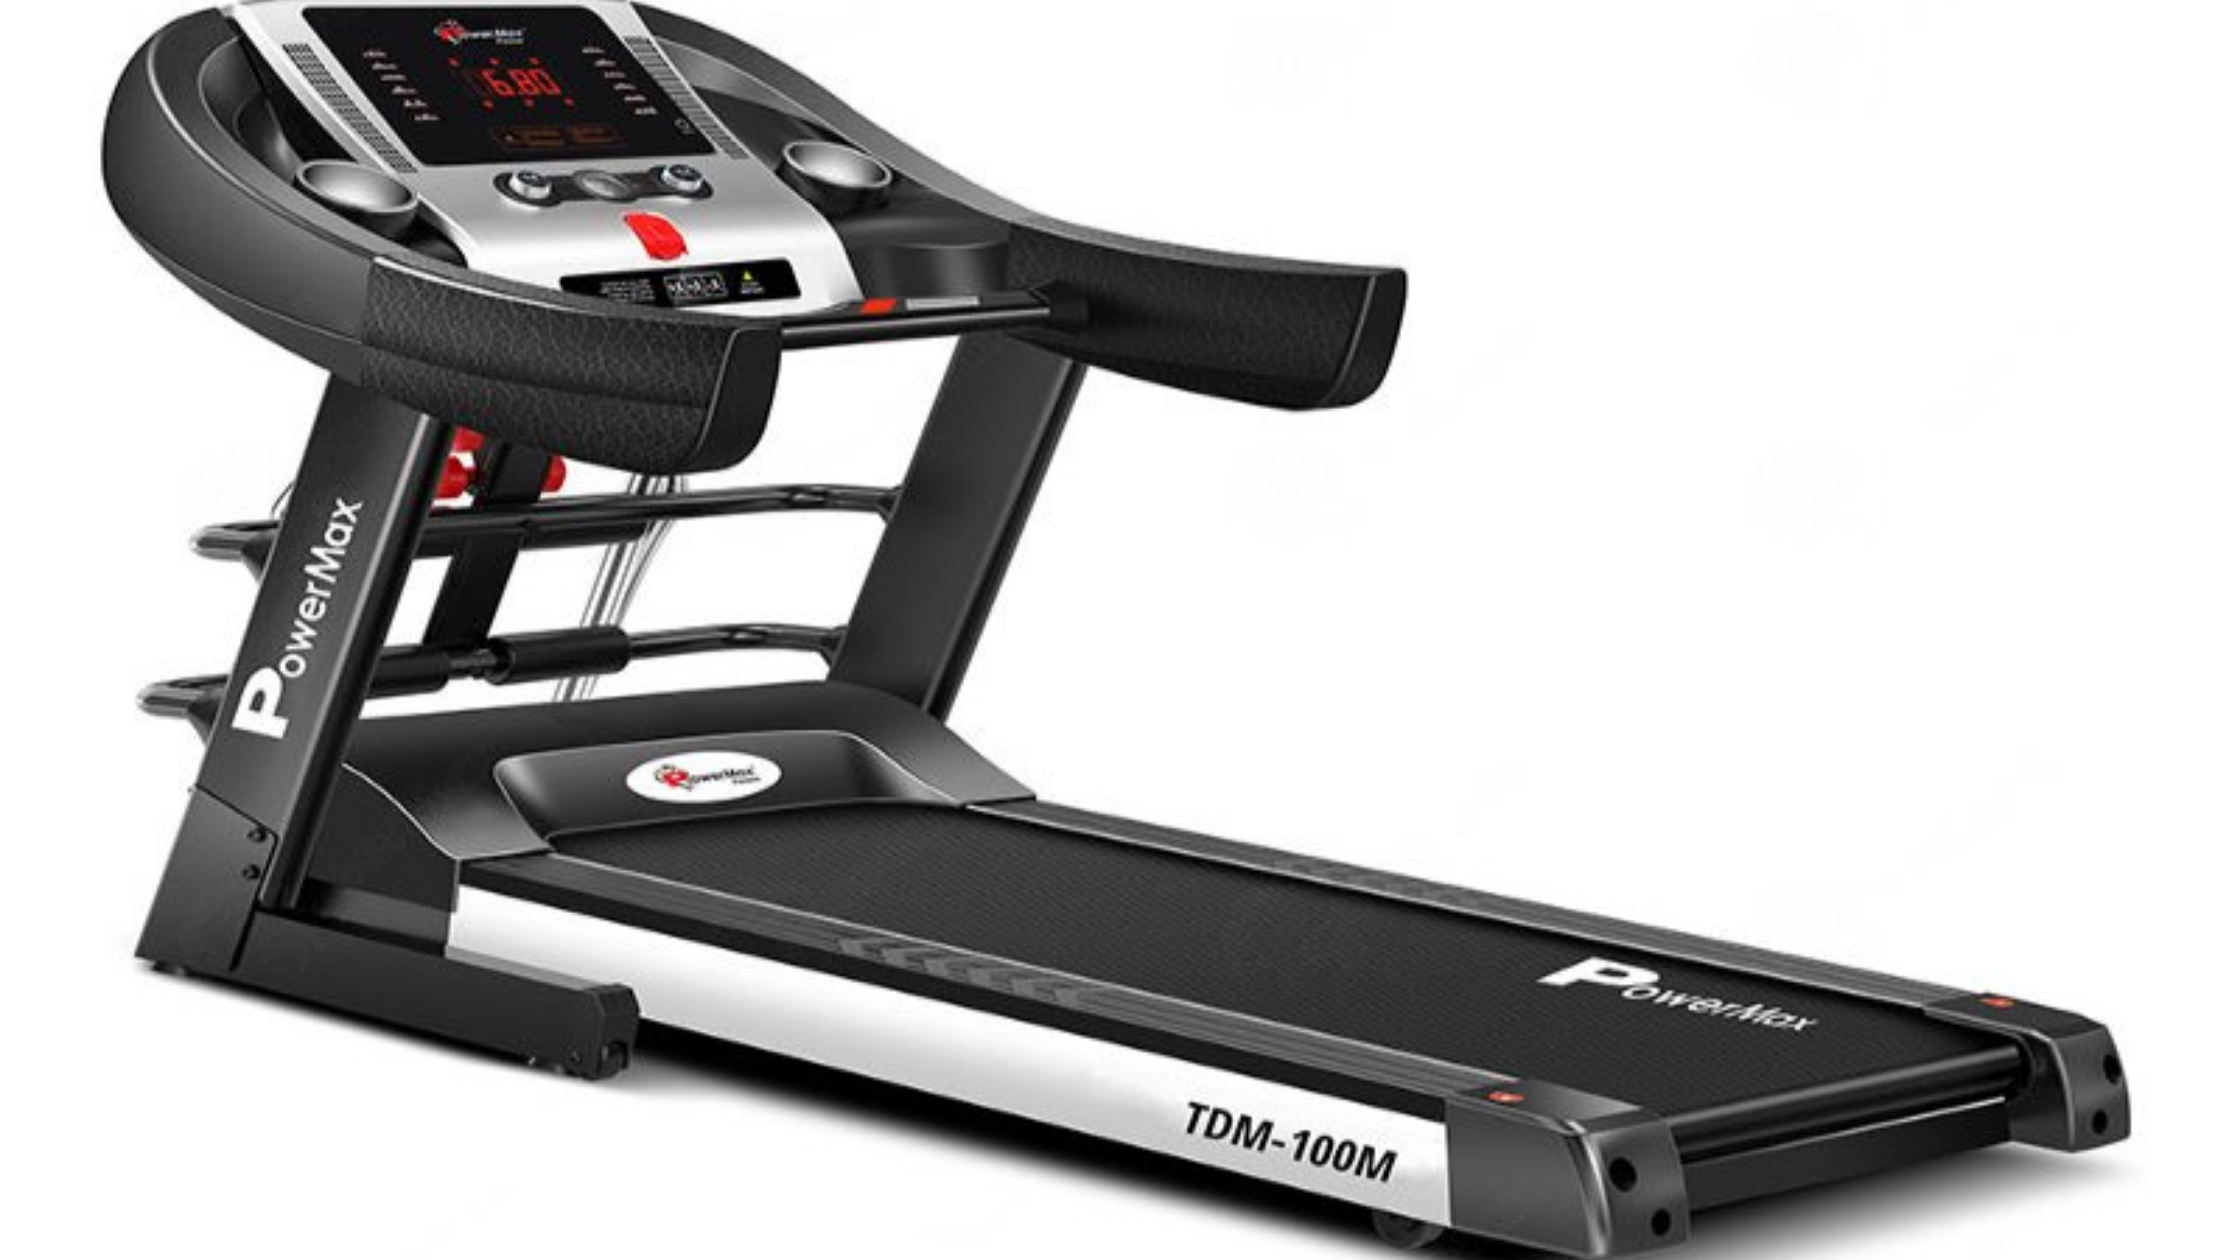 Bring home the best Powermax treadmill at best price this festive sale